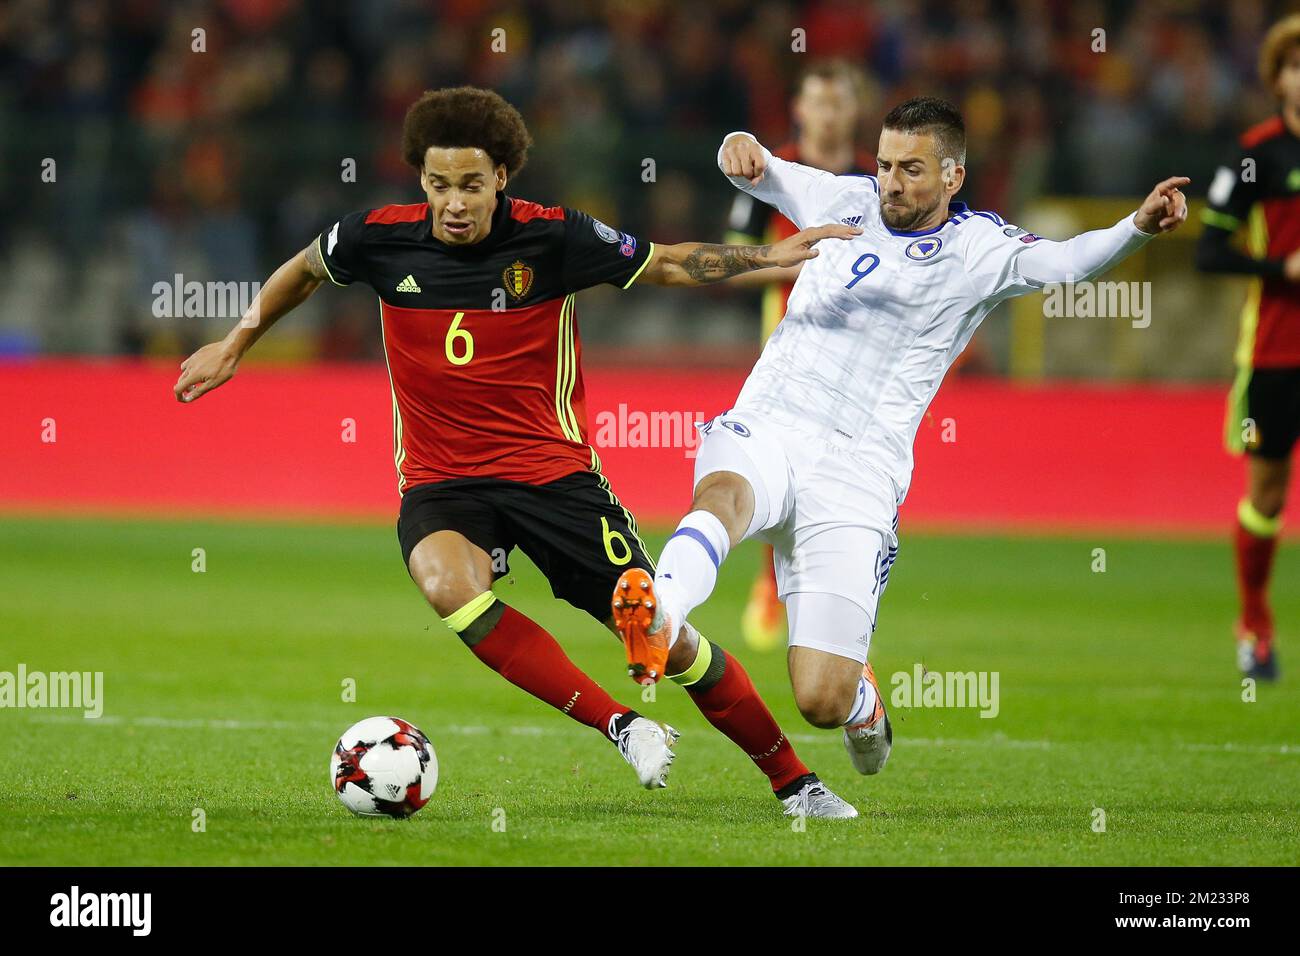 Belgium's Axel Witsel and Bosnia's Vedad Ibisevic fight for the ball during a soccer match between Belgium's Red Devils and Bosnia and Herzegovina, the second World Championships 2018 Qualification game in Group H, on Friday 07 October 2016, in Brussels. BELGA PHOTO BRUNO FAHY Stock Photo